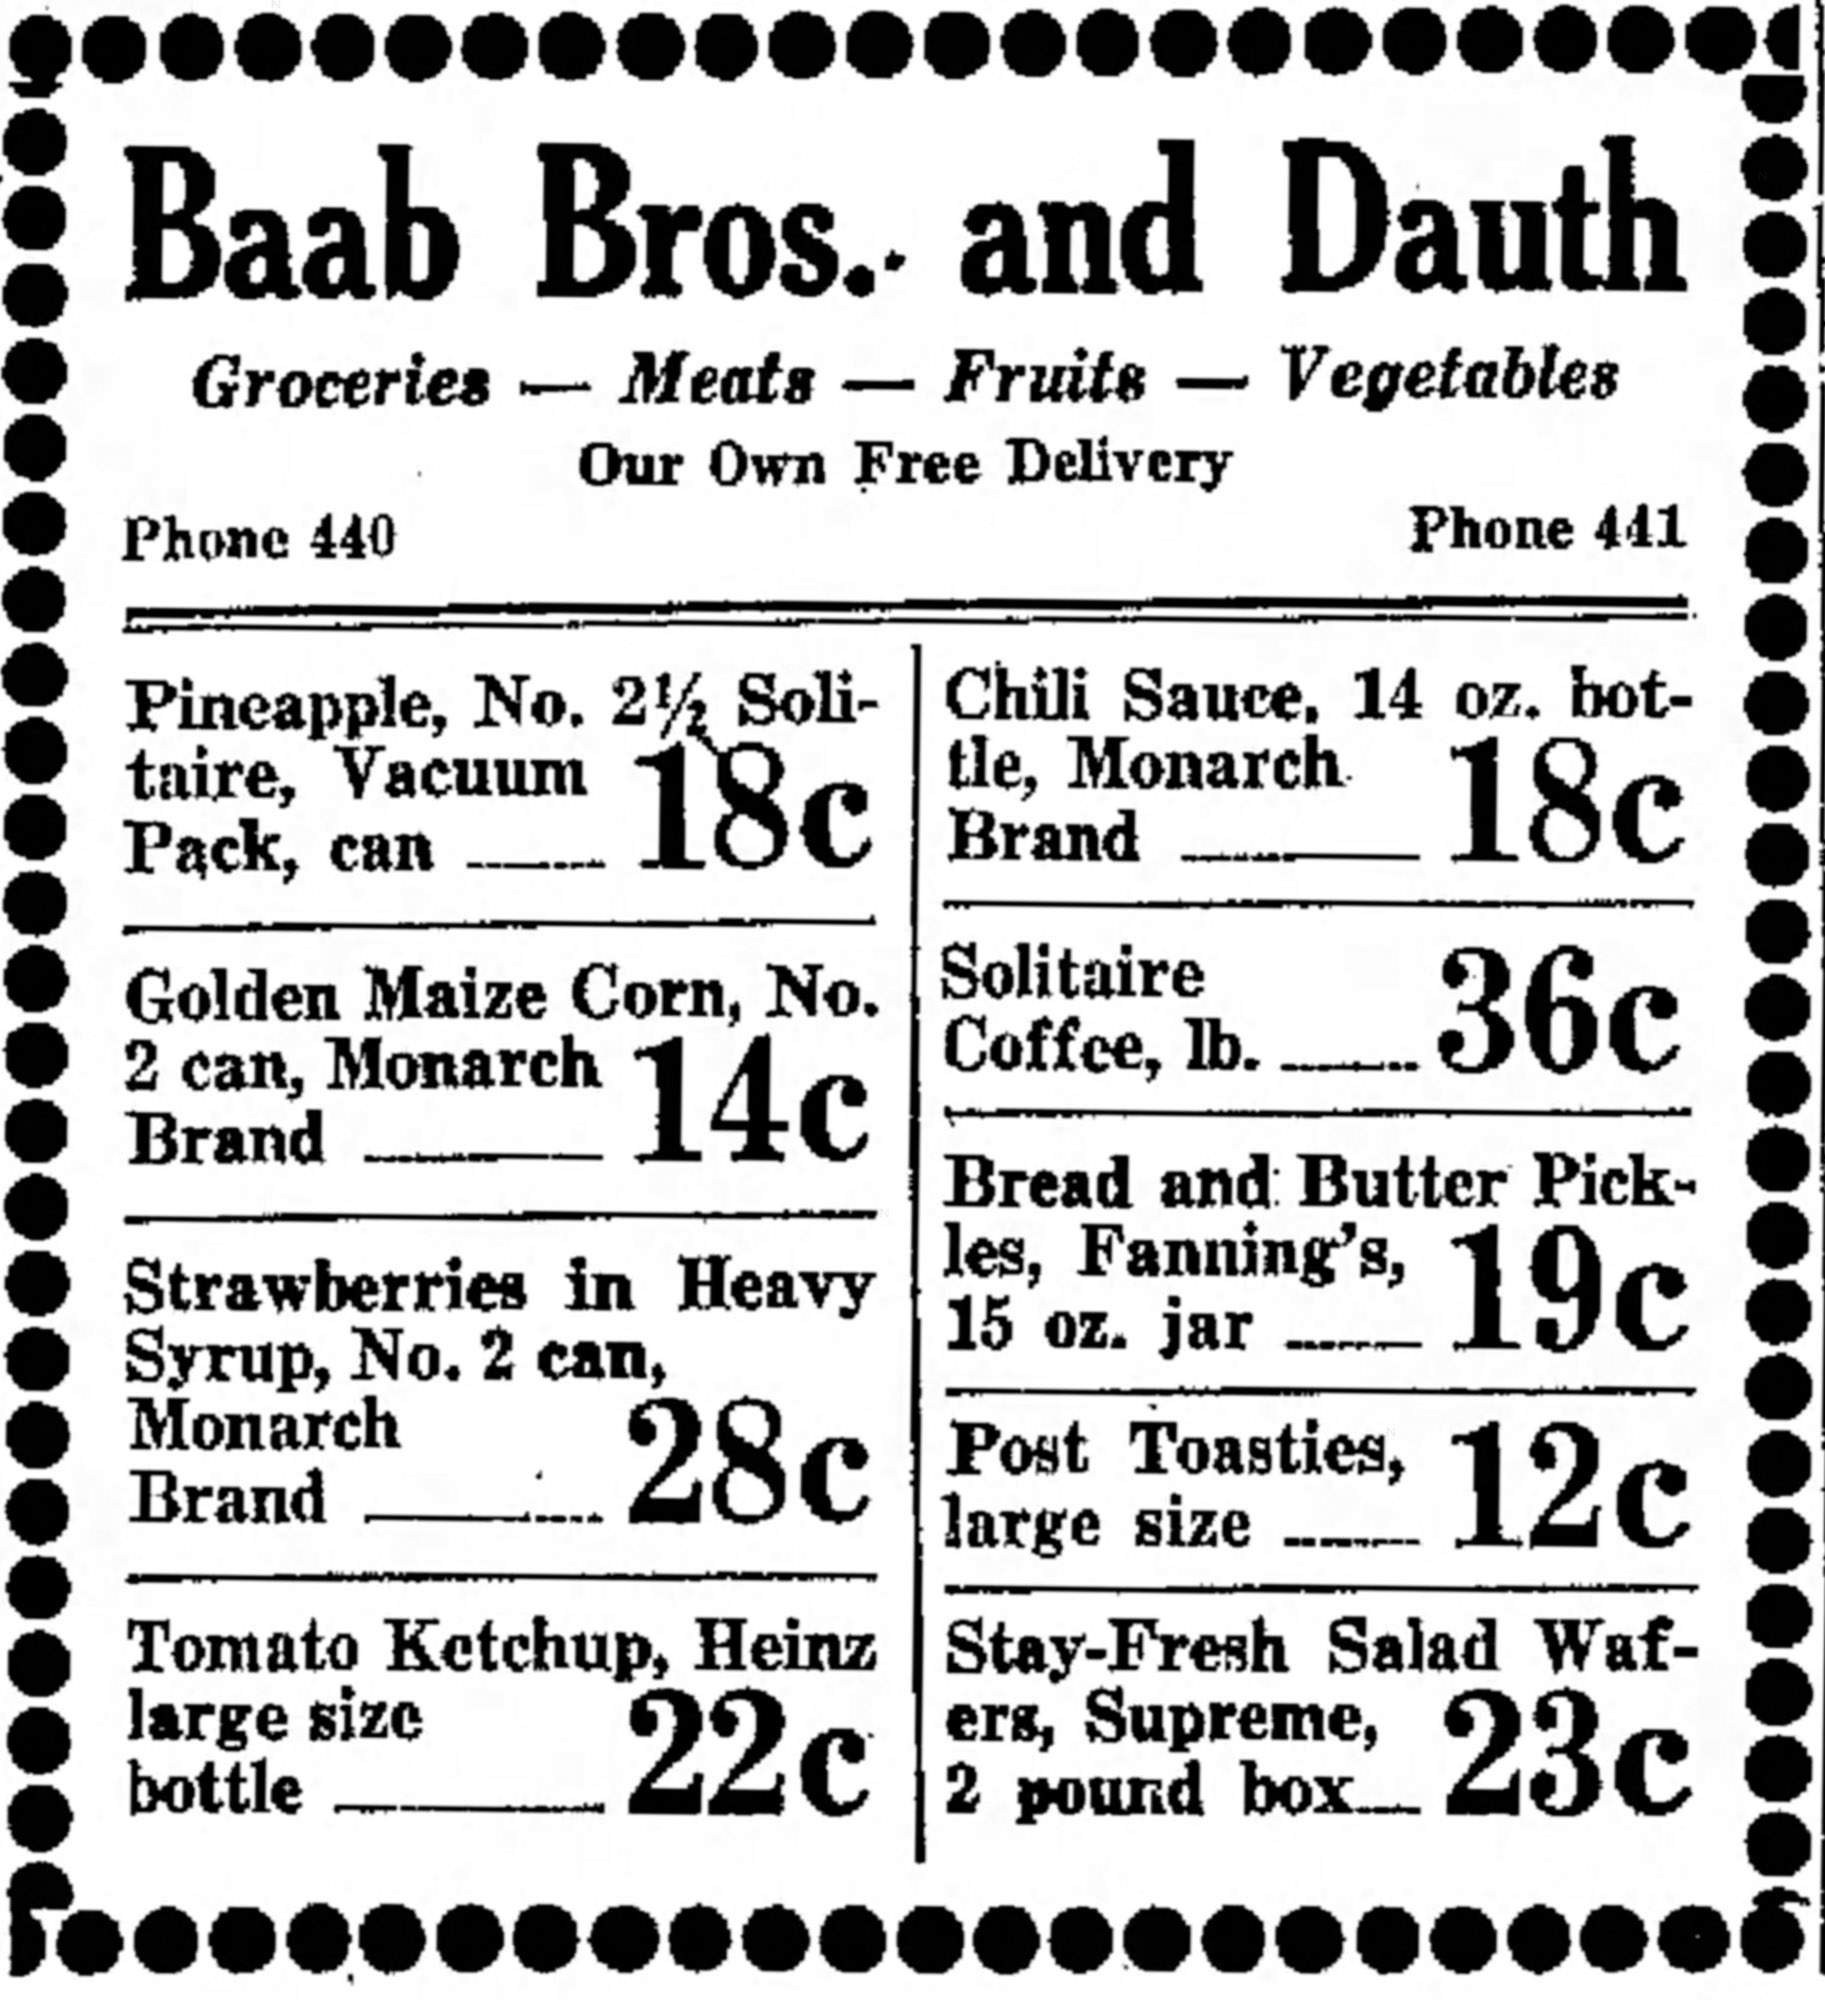 Dauth Family Archive - 1932-03-09 - Greeley Daily Tribune - Baab Bros and Dauth Advertisement